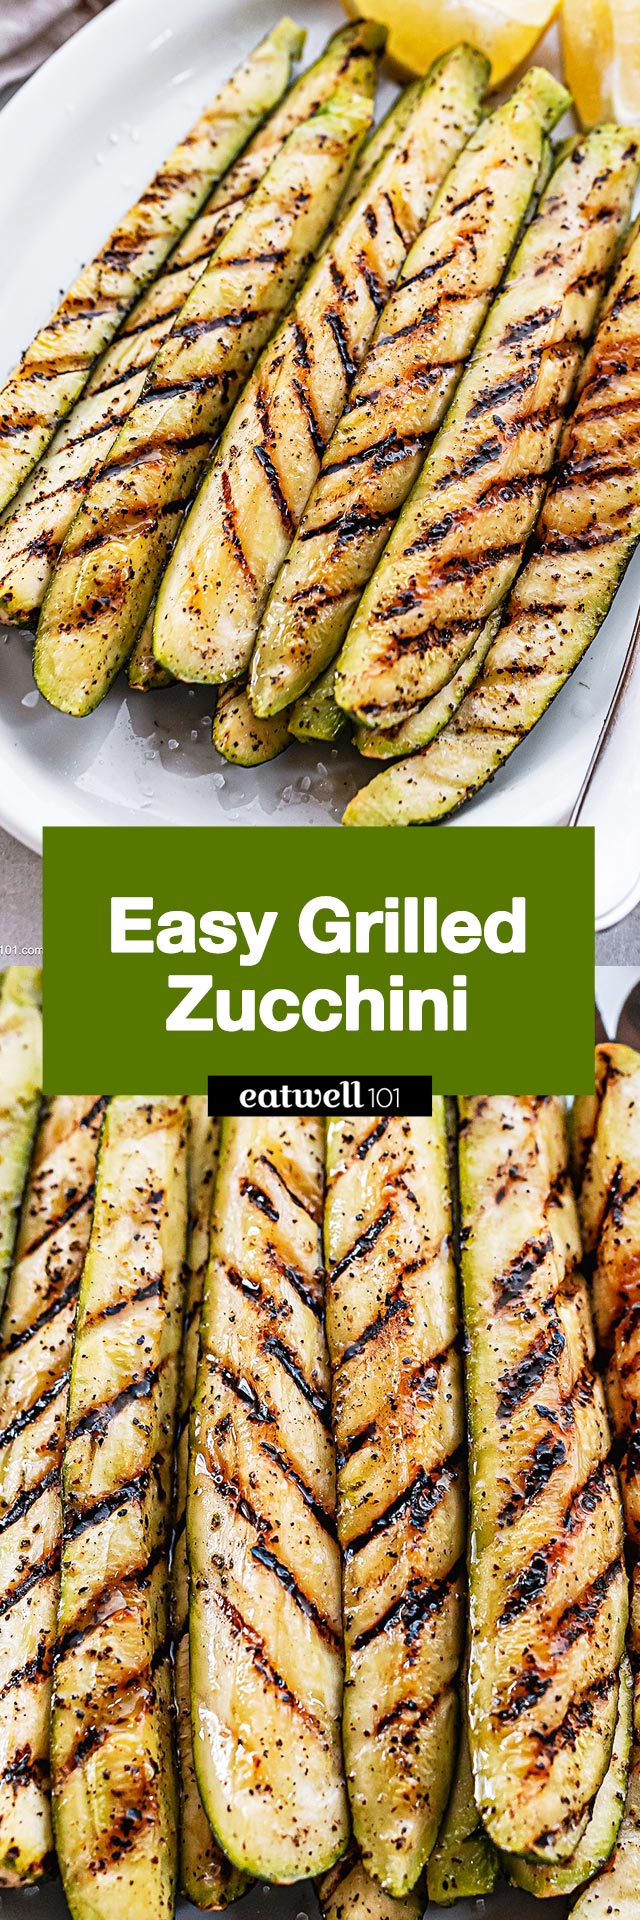 Grilled Zucchini Recipe - #grilled #bbq #zucchini #recipe #eatwell101 - Grilled zucchinis are lightly seasoned and perfectly charred this side dish is sure to be a hit at your summer cookout. Grilled zucchini is quickly becoming everyone's favorite side dish!